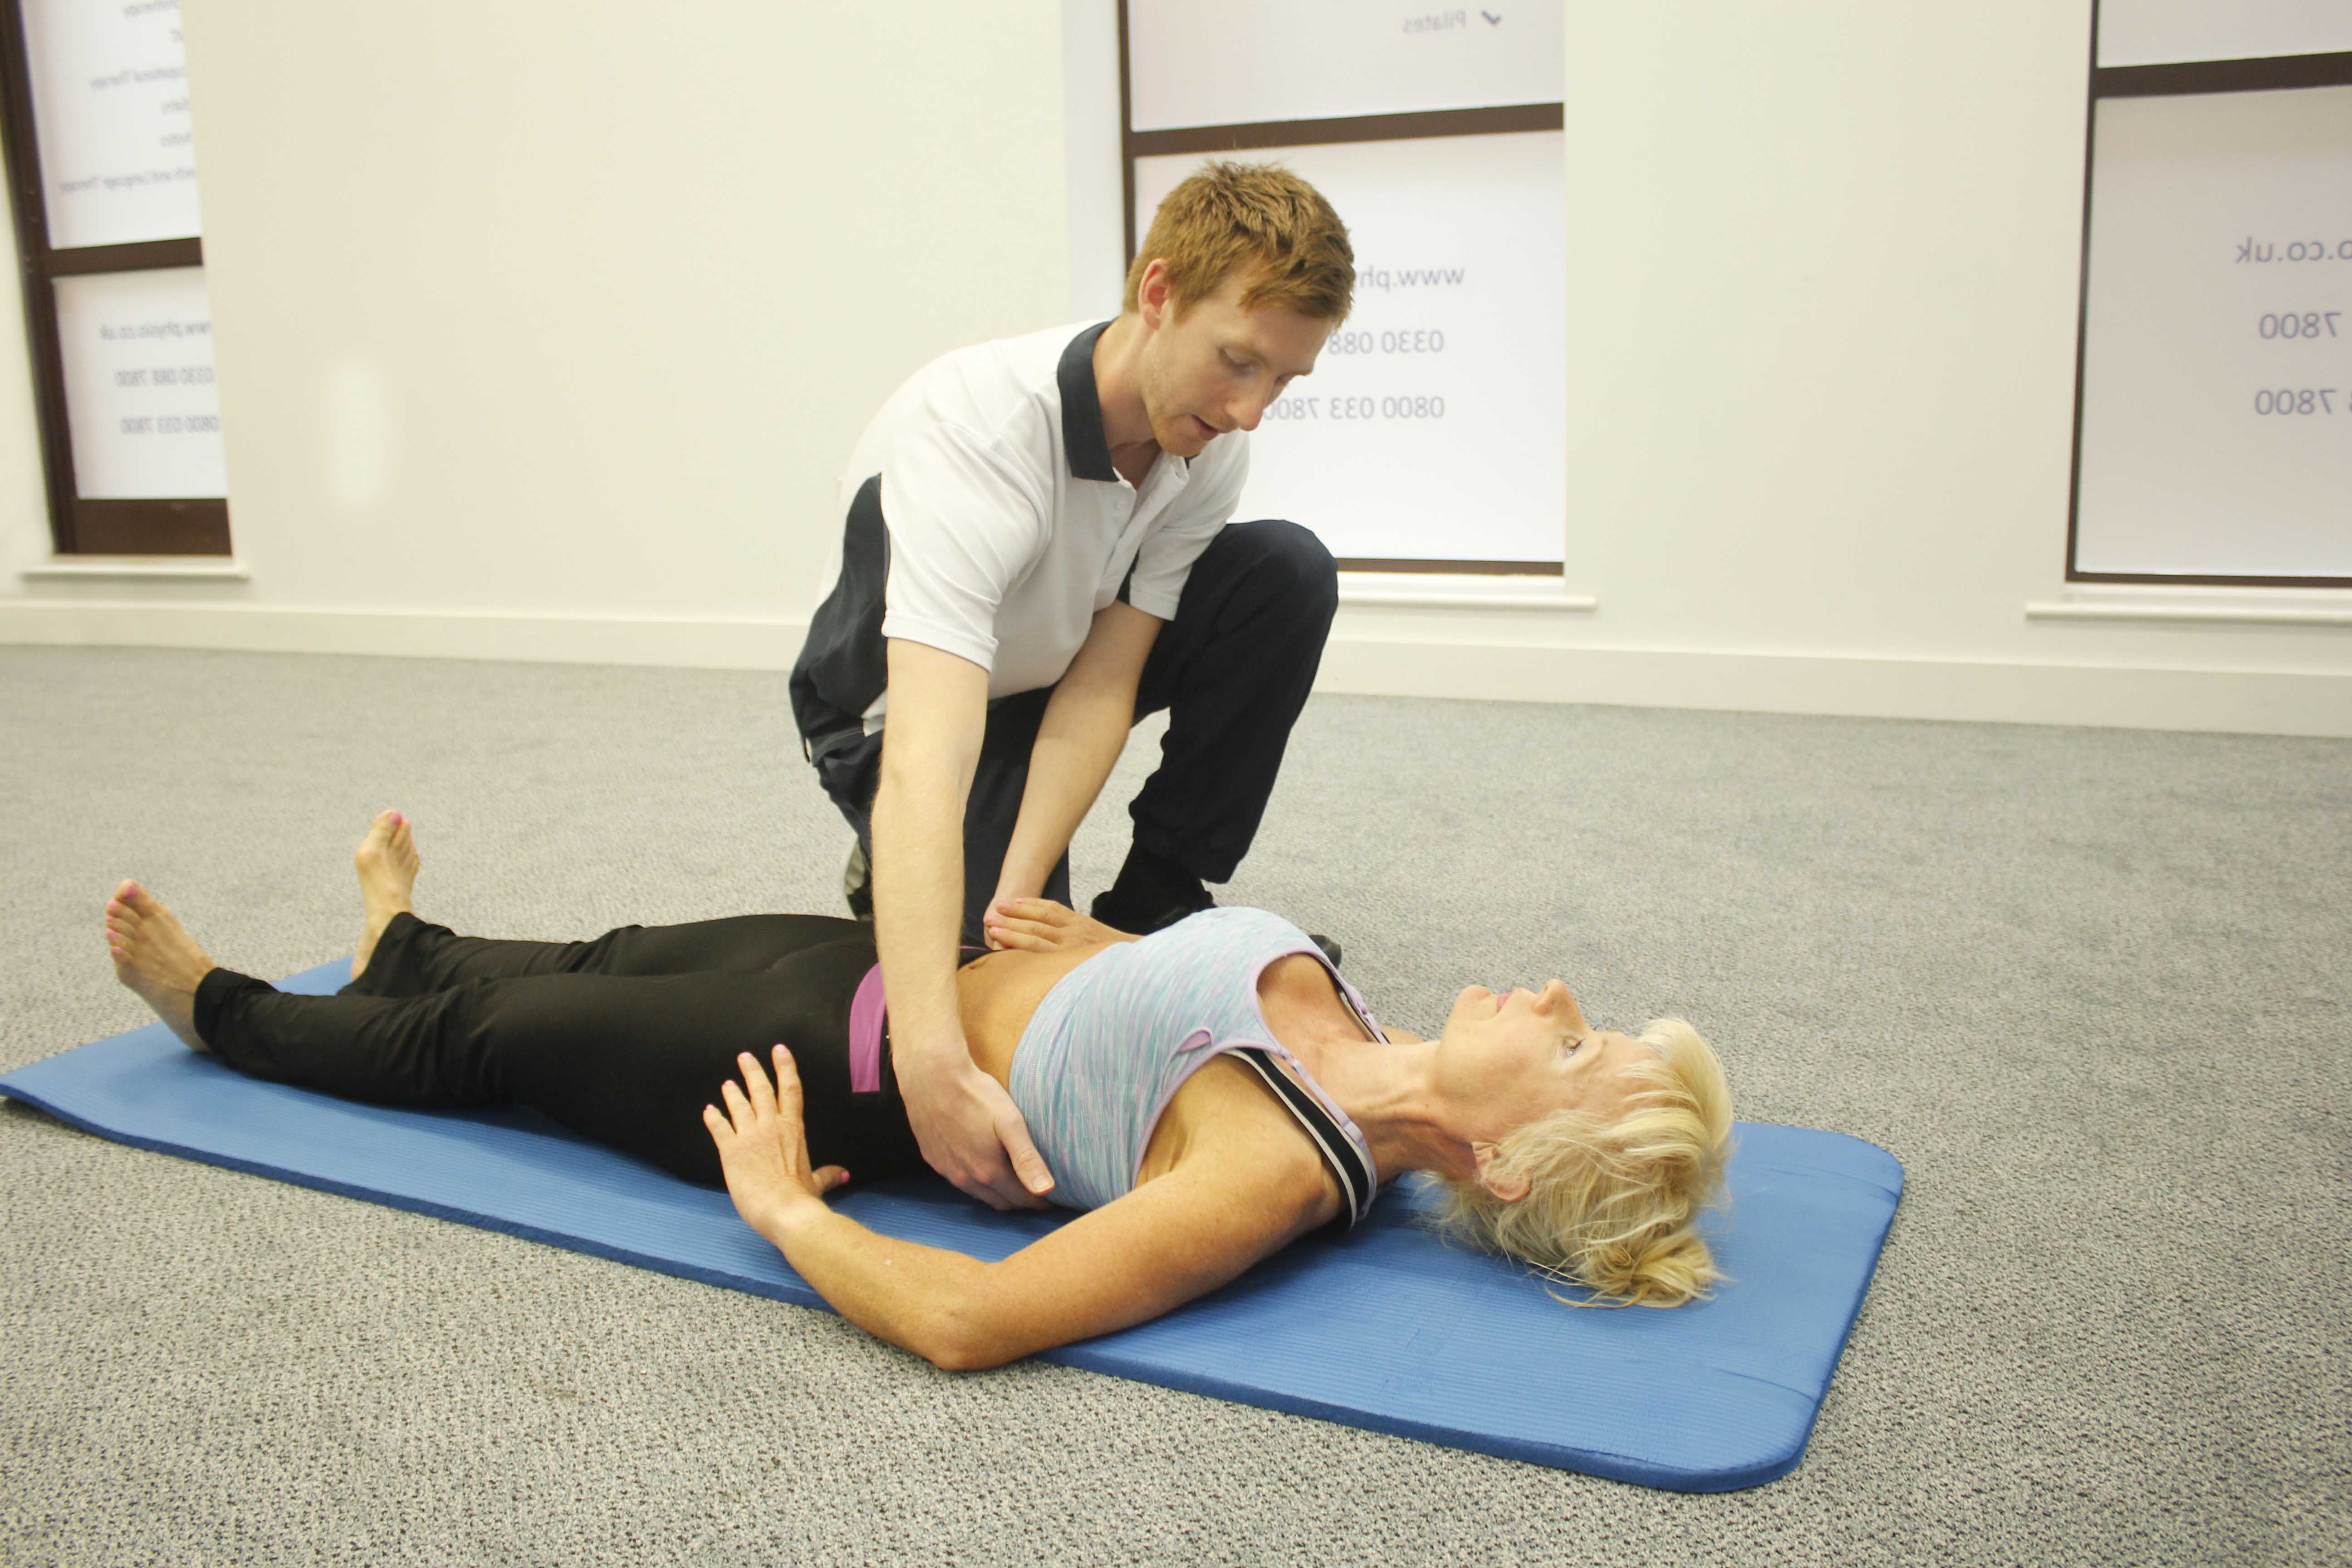 If you have suffered a fractured rib, it may be uncomforatble to take in deep breaths. Our physiotherpaist is teaching his patient a diaphramatic breathing technique.